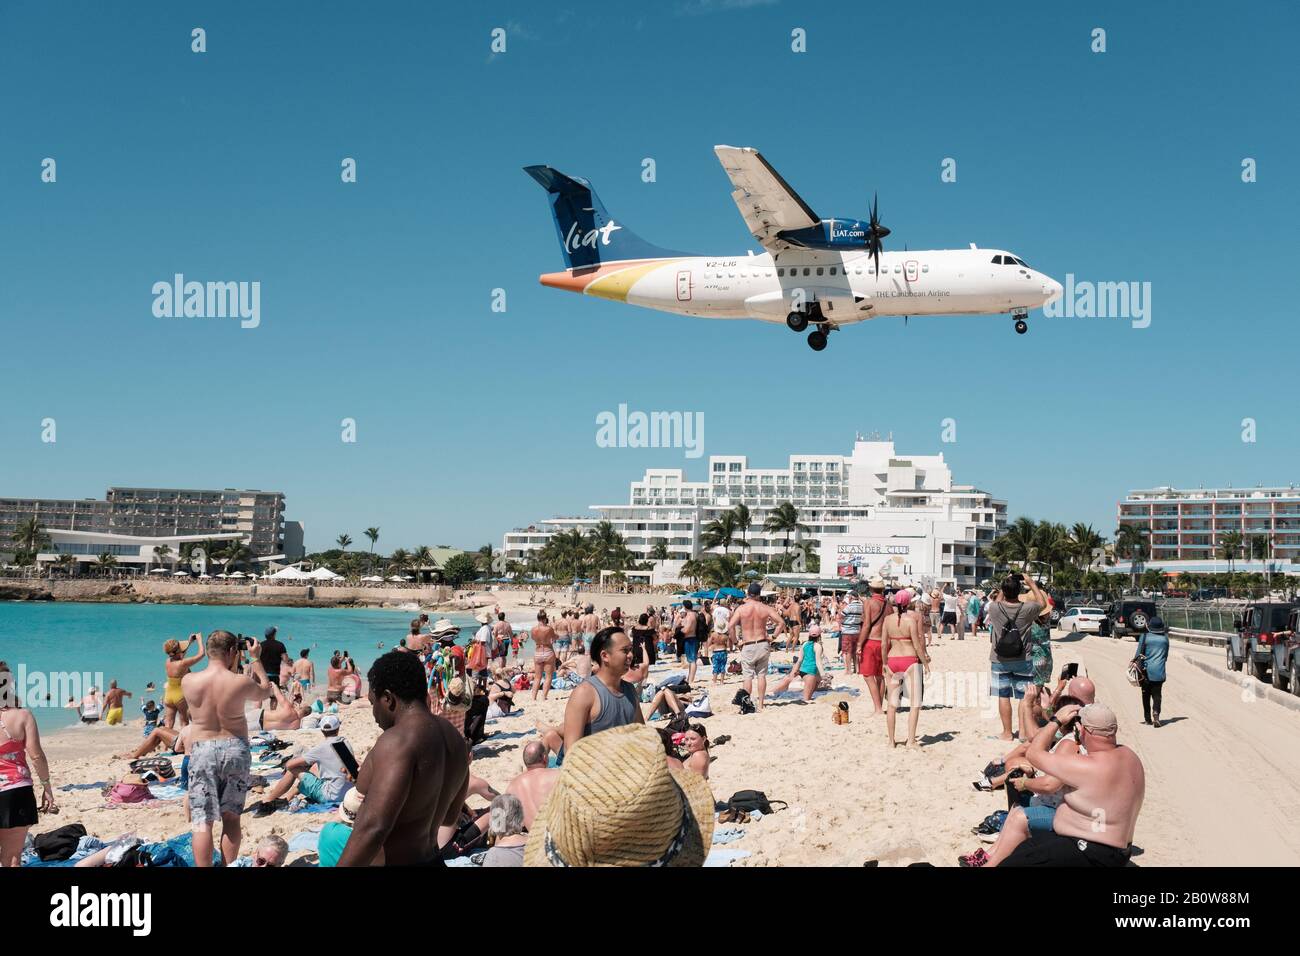 Liat Airlines Plane comining into Land, over Maho Beach, St Maartens, Caribbean, Stock Photo